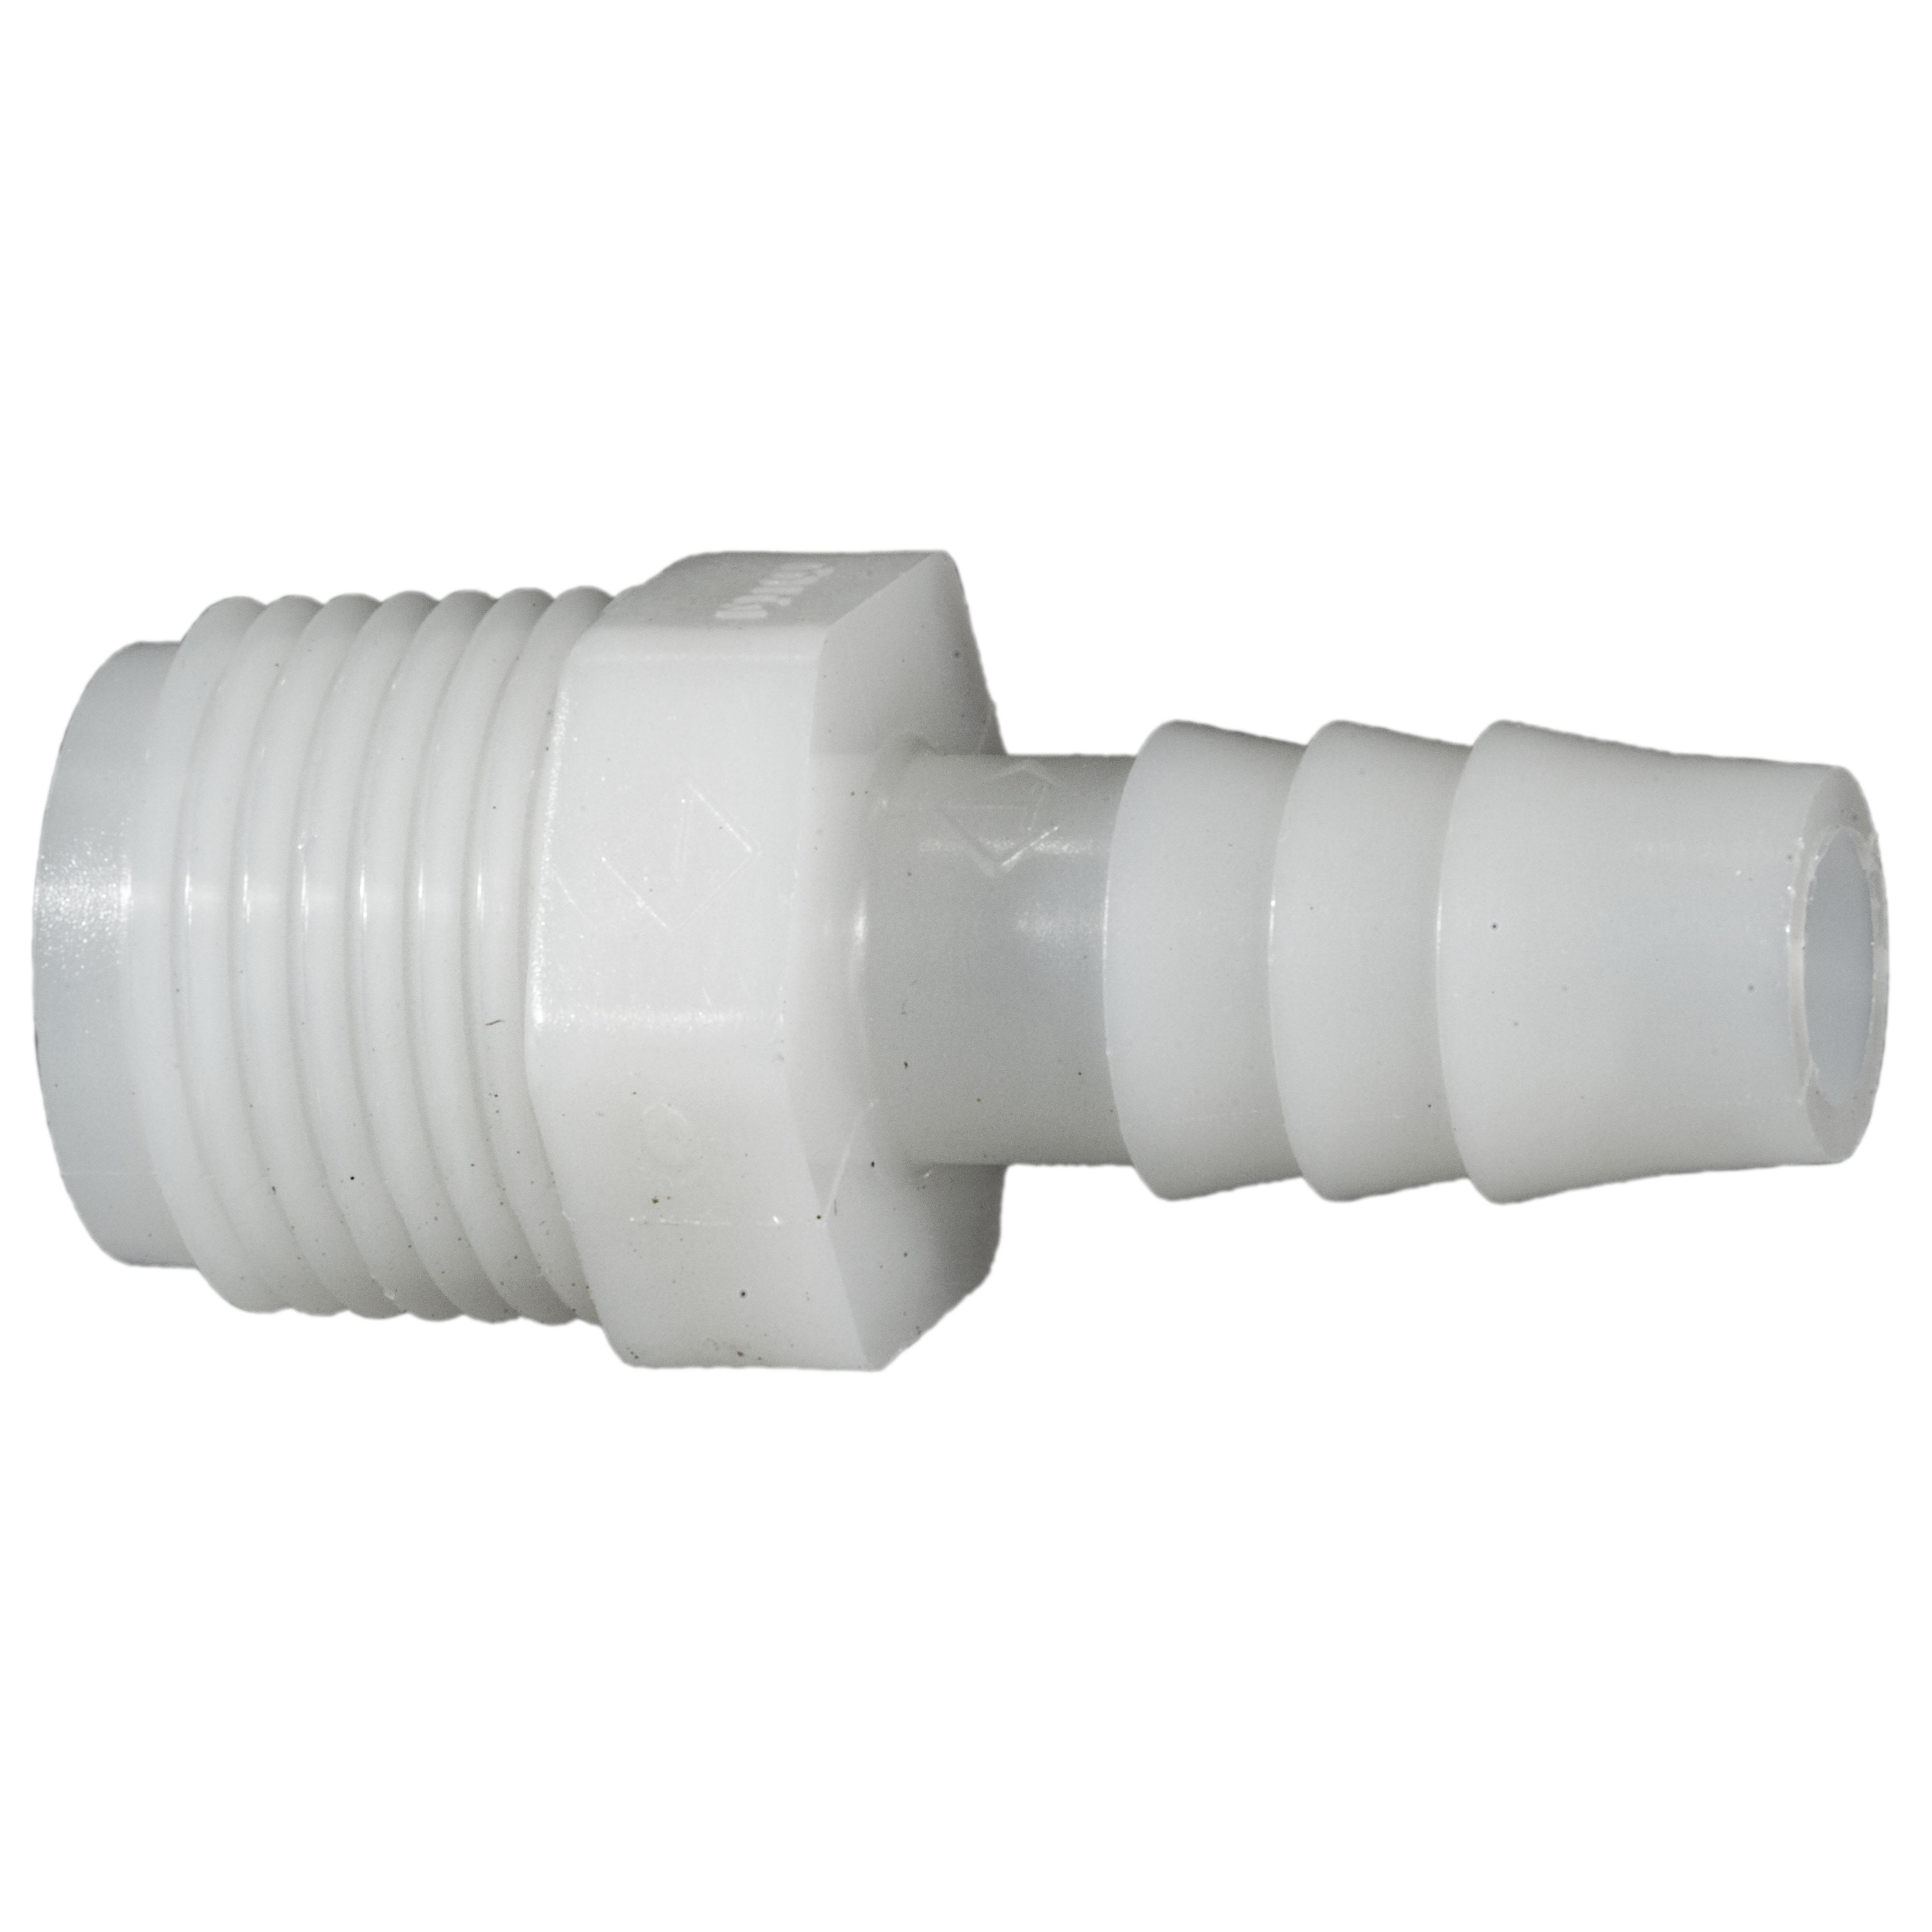 Hayward 1.5 Inch MIP x 1.5 Hose ABS Plastic Barbed Hose Fitting WhiteSP1493 